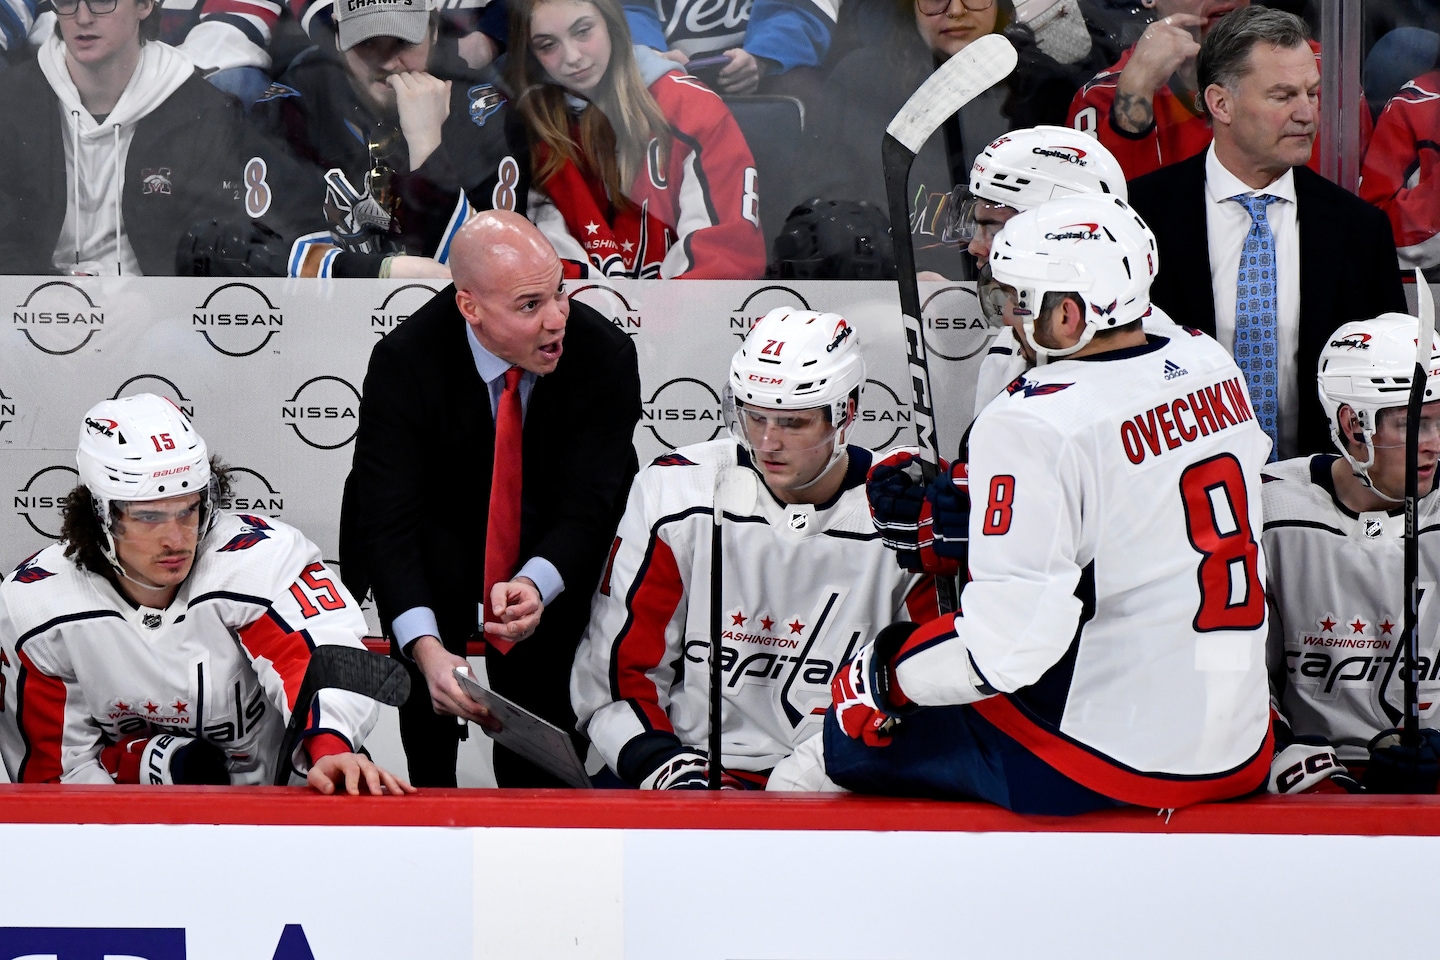 The Caps, focused on staying in the moment, try to avoid playoff math